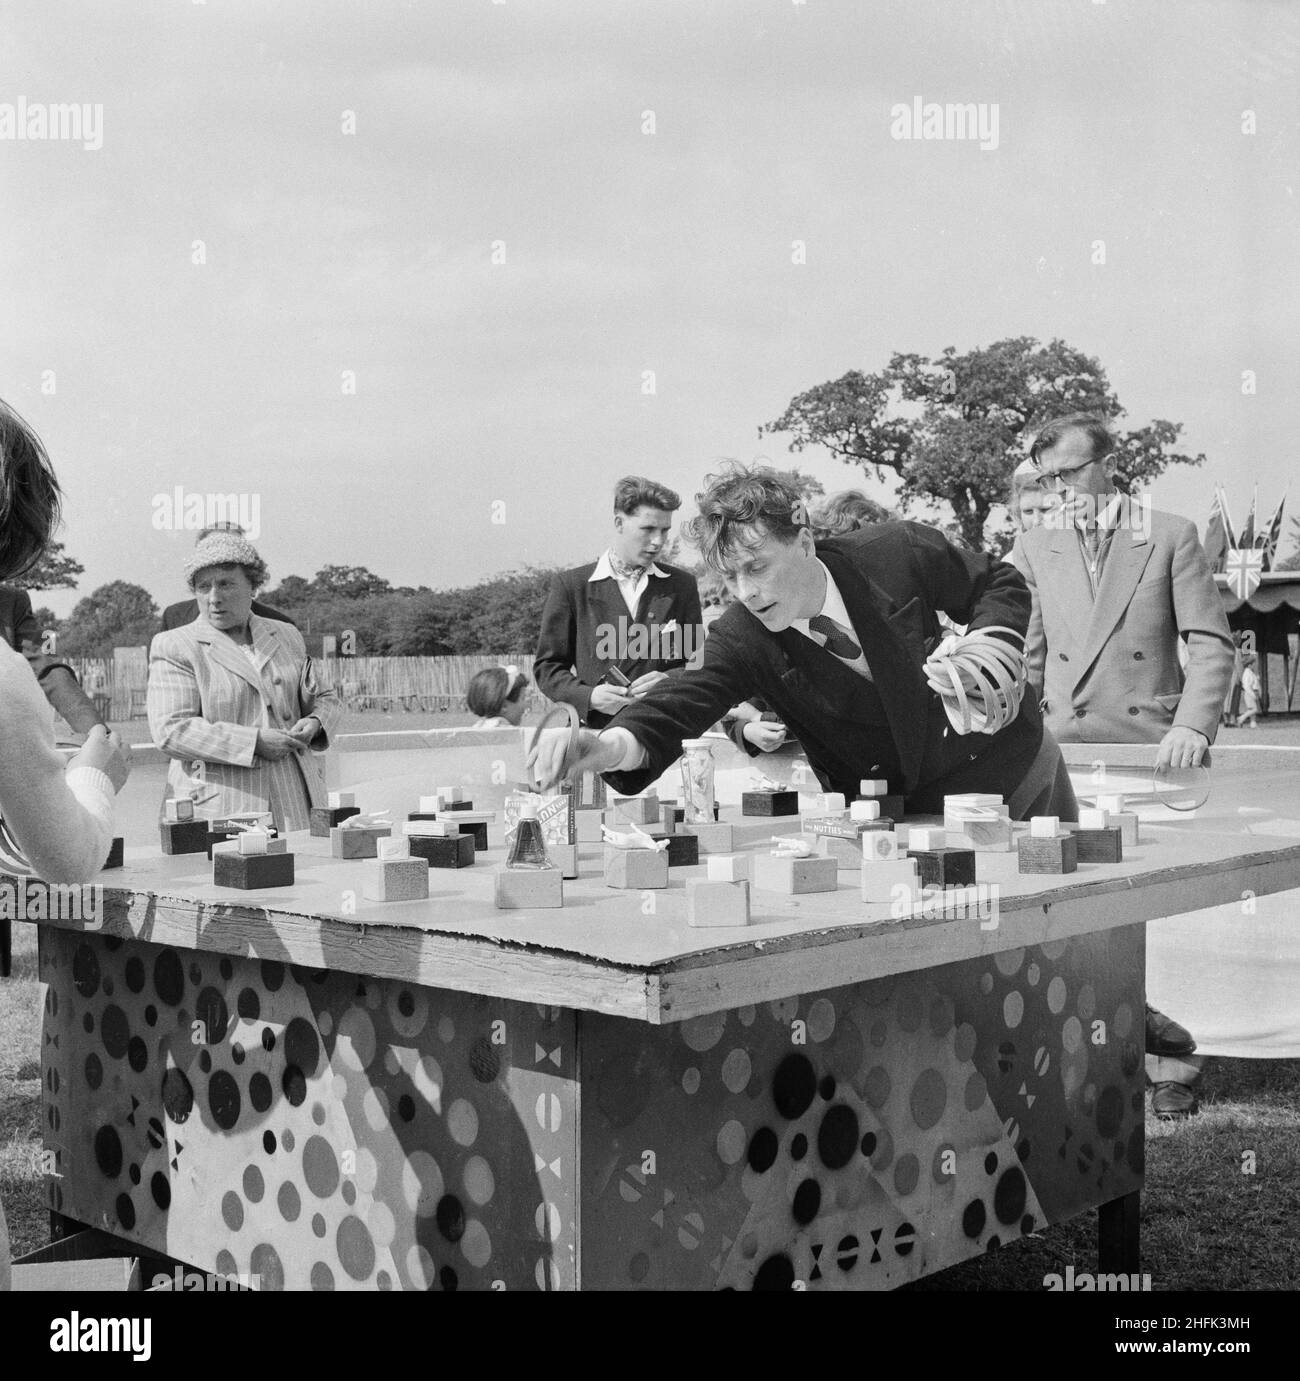 Laing Sports Ground, Rowley Lane, Elstree, Barnet, London, 30/06/1956. People playing the 'hoopla' game during a Laing sports day at Elstree, showing a table with prizes on small blocks and a man collecting the hoops ready for the next round. This sports day was attended by many Laing staff members and their families, with some travelling to Elstree from as far as Swindon, Leicester and Dagenham. The day consisted of various track and field events as well as attractions for children including fairground rides and performers. Handicraft, cookery, flower and photography competitions were also he Stock Photo